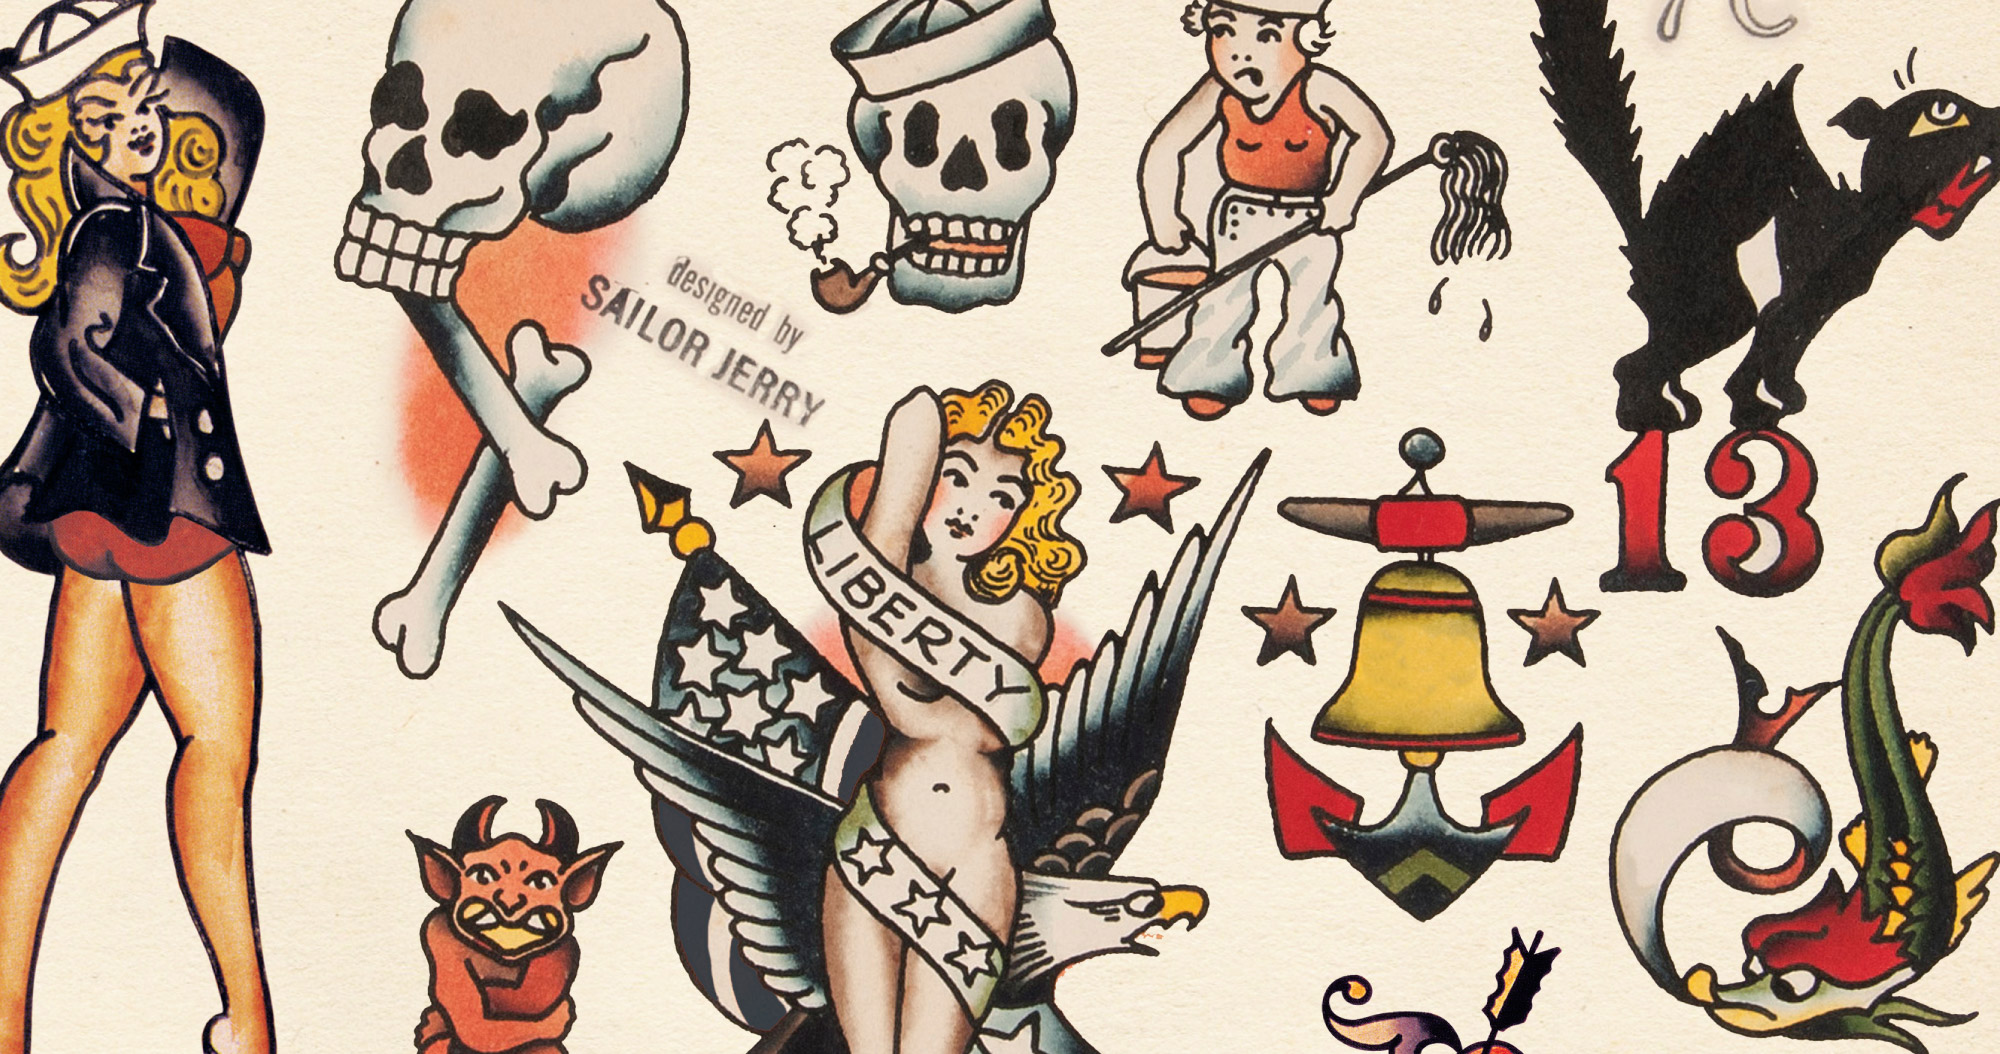 Buy Sailor Jerry Tattoo Designs flash 3 Giclee Poster Print Online in India   Etsy